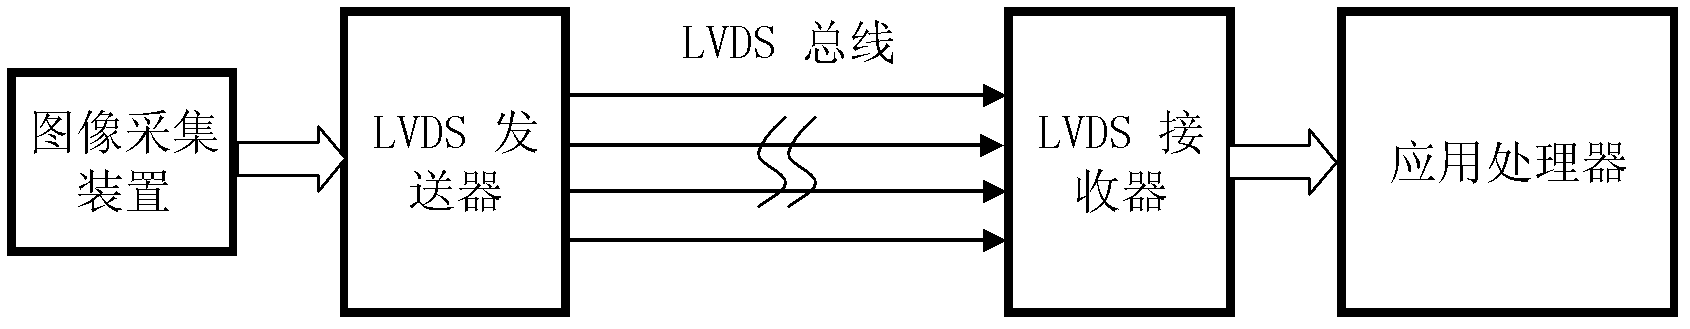 Low-voltage differential signaling (LVDS) receiver, transmitter and method for receiving and transmitting LVDS